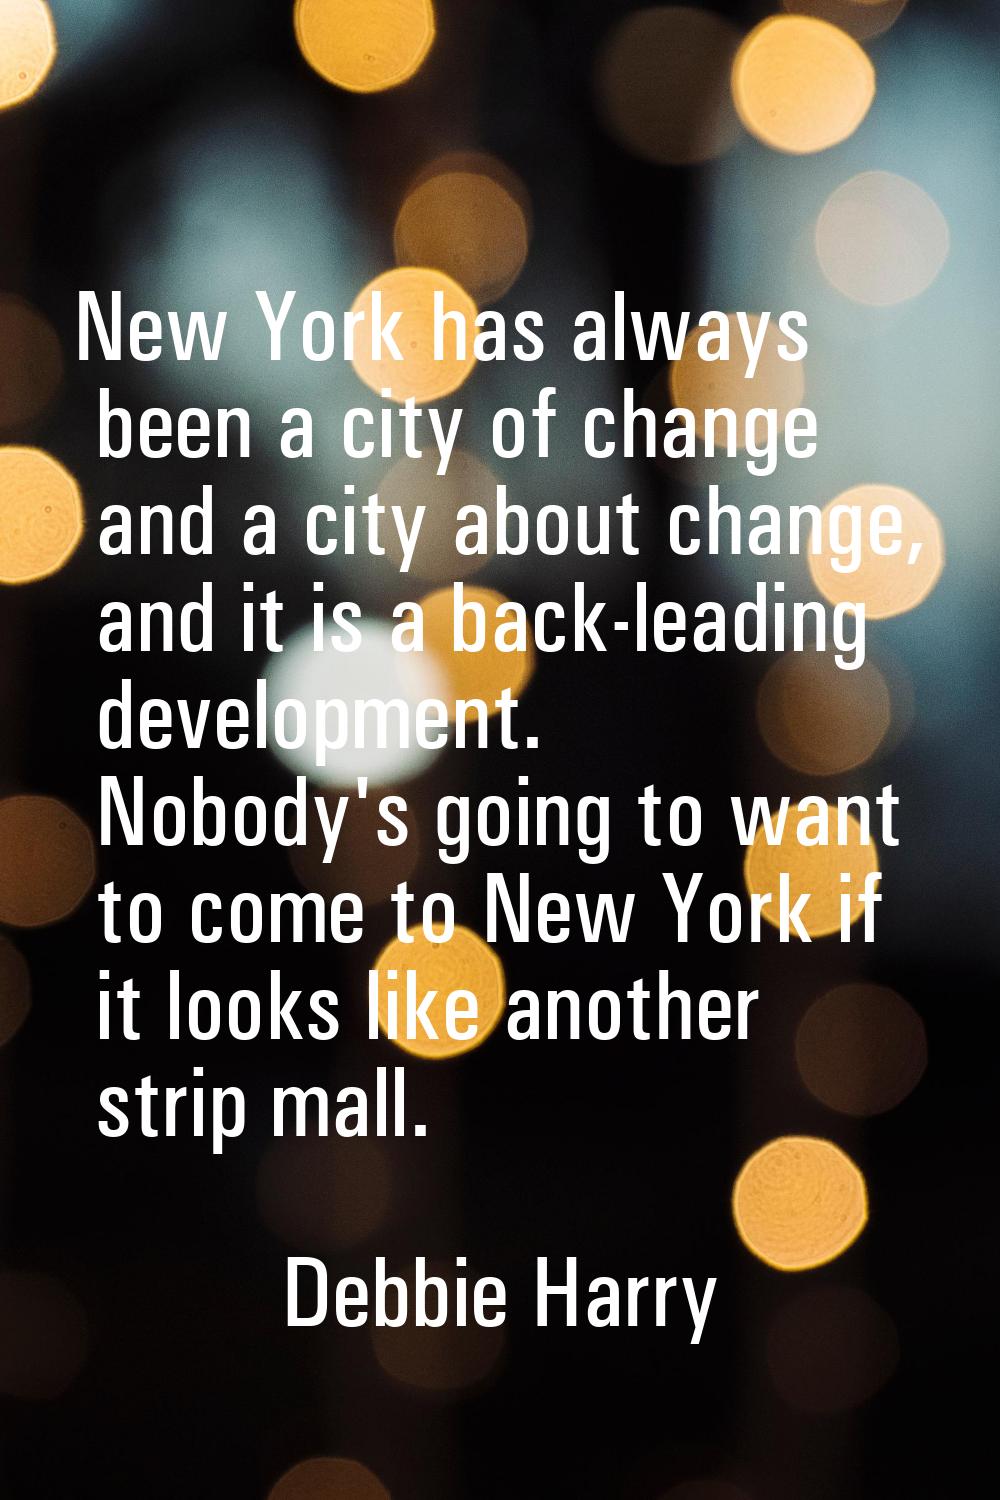 New York has always been a city of change and a city about change, and it is a back-leading develop